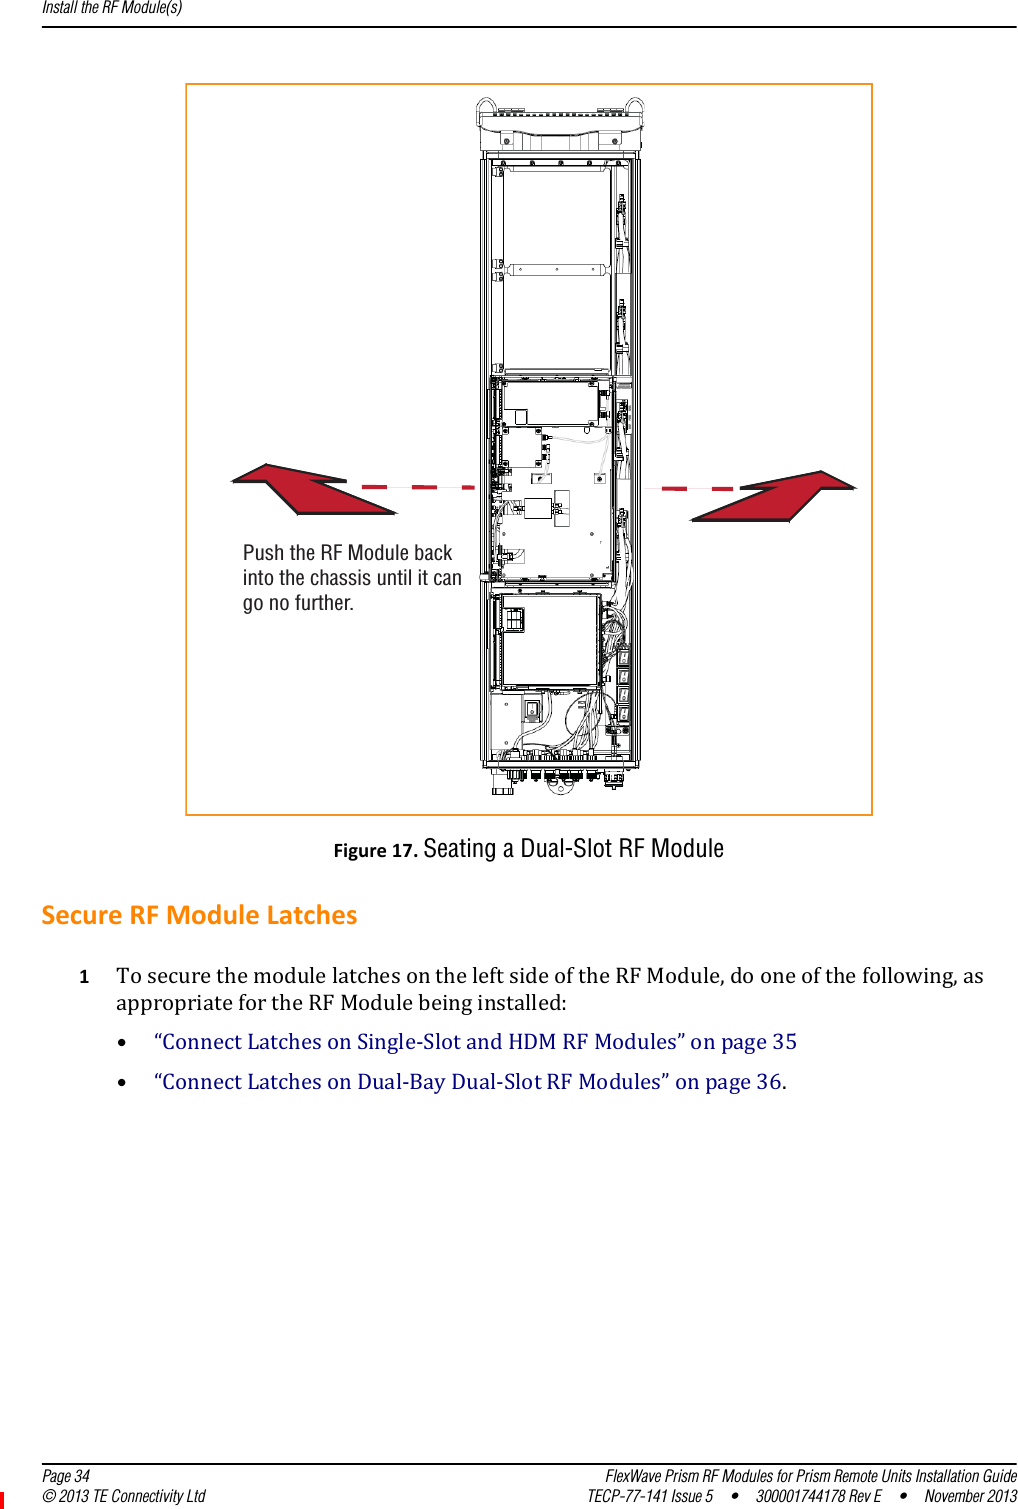 Install the RF Module(s)  Page 34 FlexWave Prism RF Modules for Prism Remote Units Installation Guide© 2013 TE Connectivity Ltd TECP-77-141 Issue 5  •  300001744178 Rev E  •  November 2013Figure17.Seating a Dual-Slot RF ModuleSecureRFModuleLatches1TosecurethemodulelatchesontheleftsideoftheRFModule,dooneofthefollowing,asappropriatefortheRFModulebeinginstalled:•“ConnectLatchesonSingle‐SlotandHDMRFModules”onpage35•“ConnectLatchesonDual‐BayDual‐SlotRFModules”onpage36.Push the RF Module backinto the chassis until it cango no further.